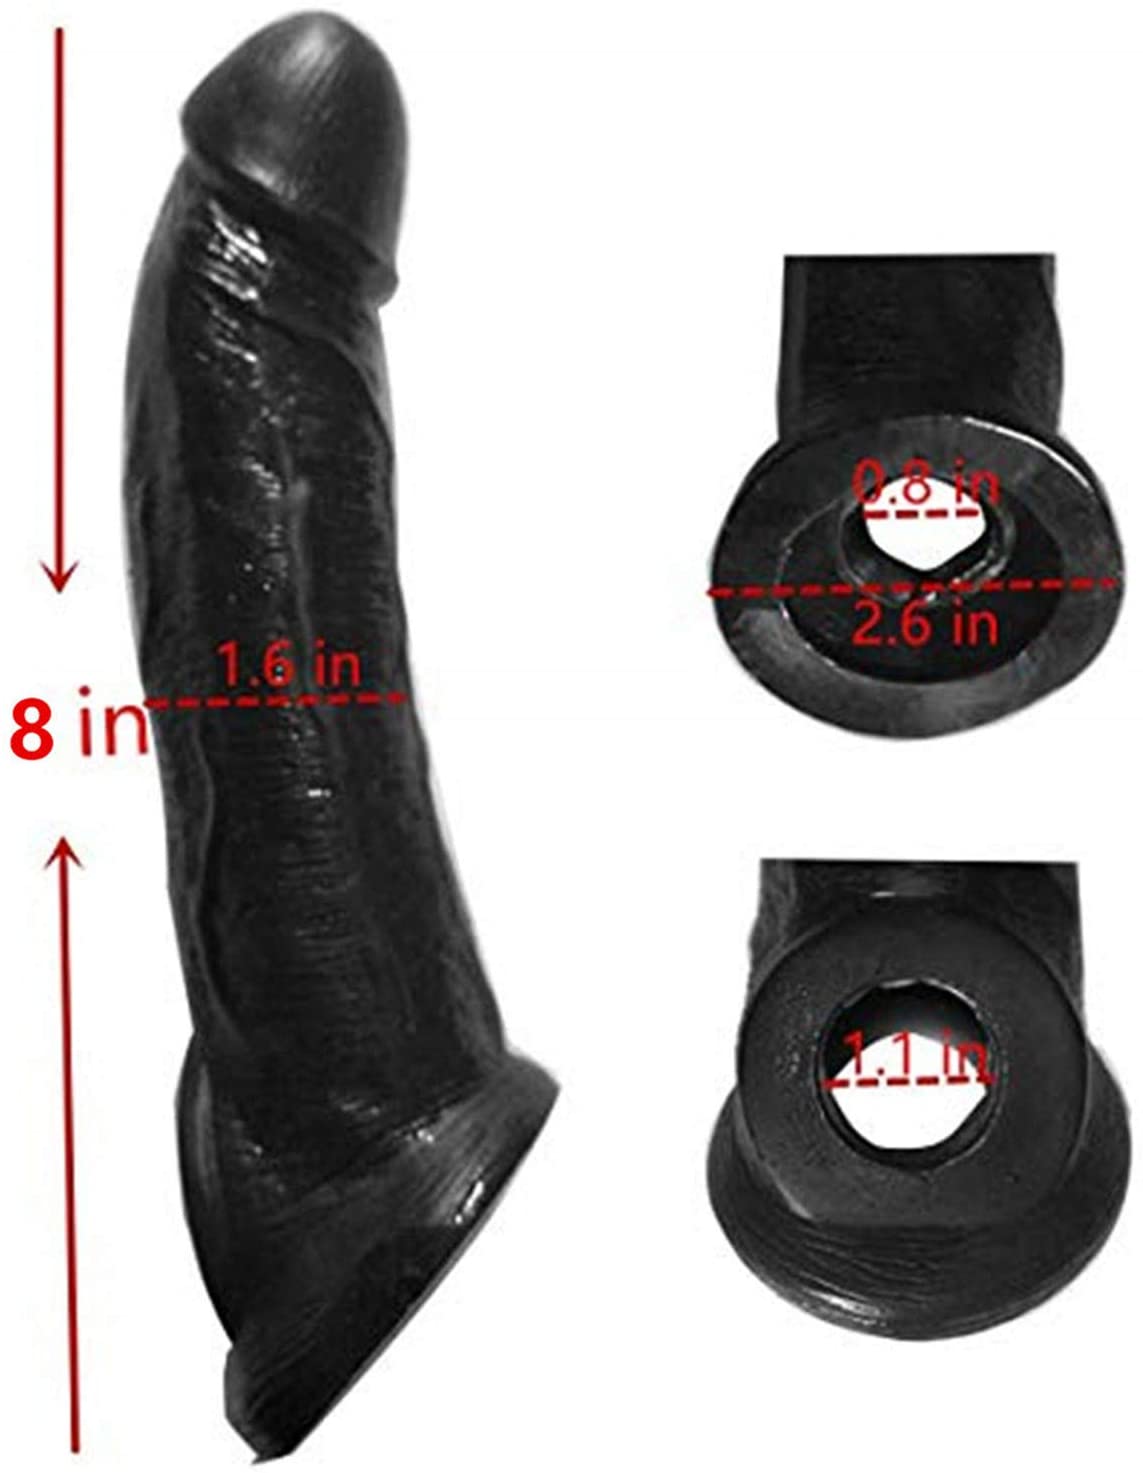 barbara pennell recommends 8 inch black penis pic